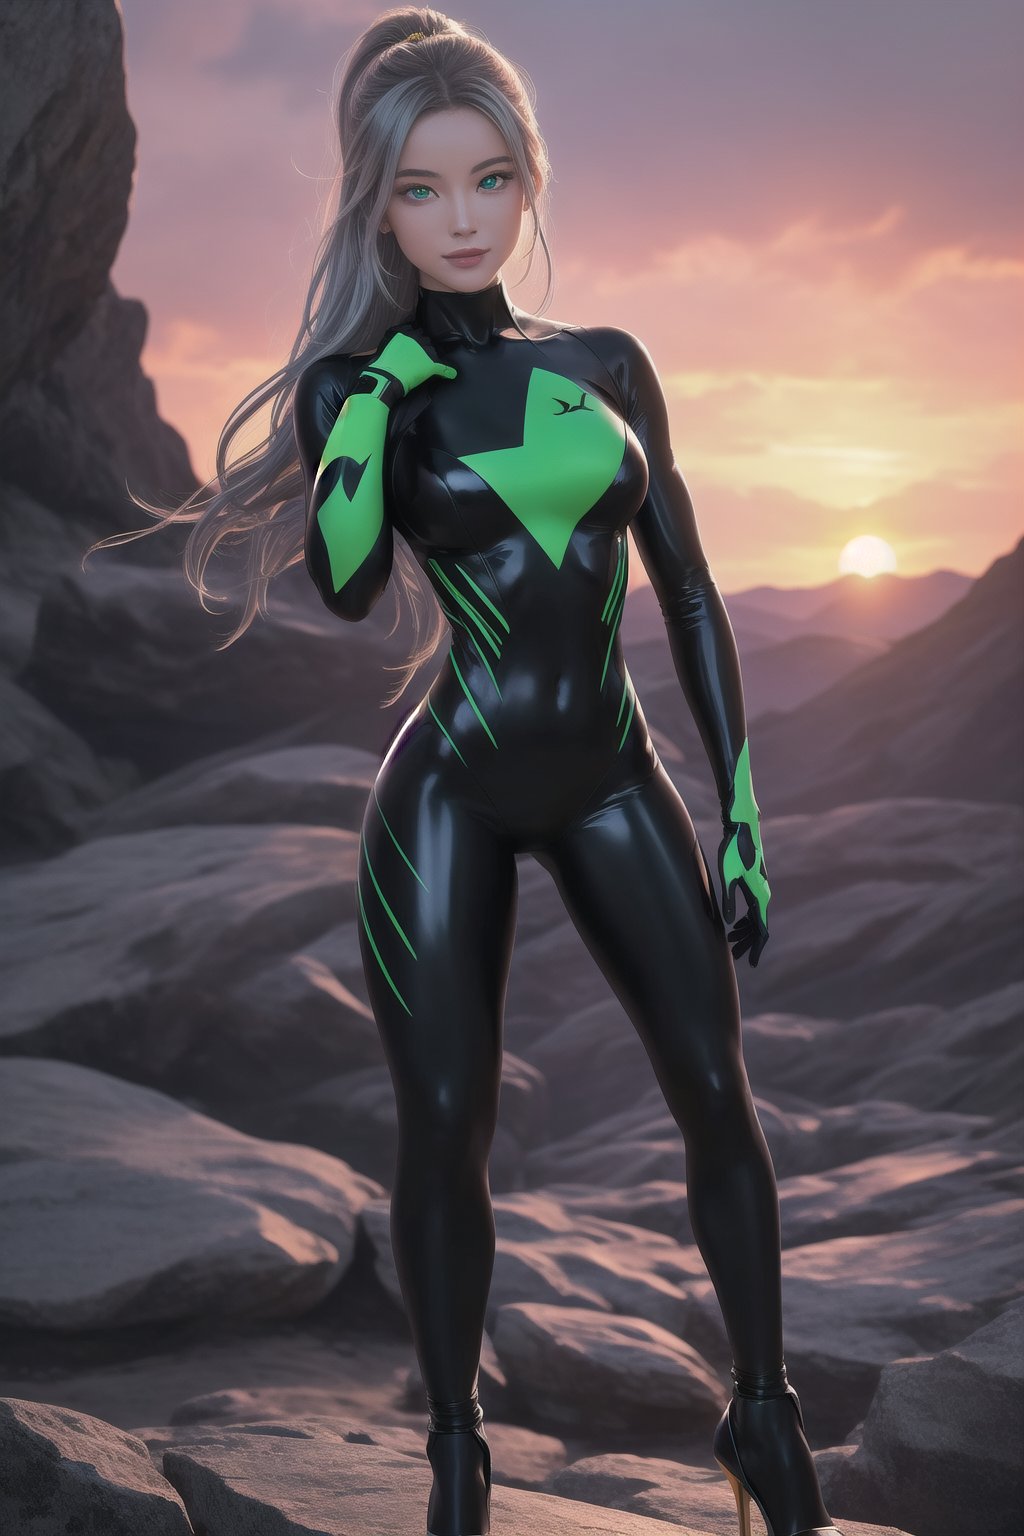 

Depict a stunning 25-year-old female figure wearing a skin-tight intricately complex cybernetic bodysuit with a black and silver body made of brushed titanium and polished tungsten. She is empty-handed.  Her face, with vivid kelly-green eyes, has a confident expression, while her lean athletic body showcases muscle definition (0.5) and wide hips (1.6). Medium breasts are subtly accentuated by the fitted suit. The figure stands in a contrapposto pose, one leg slightly bent, wearing stiletto heels that seem to defy gravity.

Set against a breathtaking rocky barren landscape without buildings and without structures, the model is framed within a beautiful sunset sky with hues of oranges, yellows, and pinks. The 8K resolution masterpiece features highly detailed textures, polished surfaces, and a tight focus that draws the viewer's eye to every aspect of this stunning image.